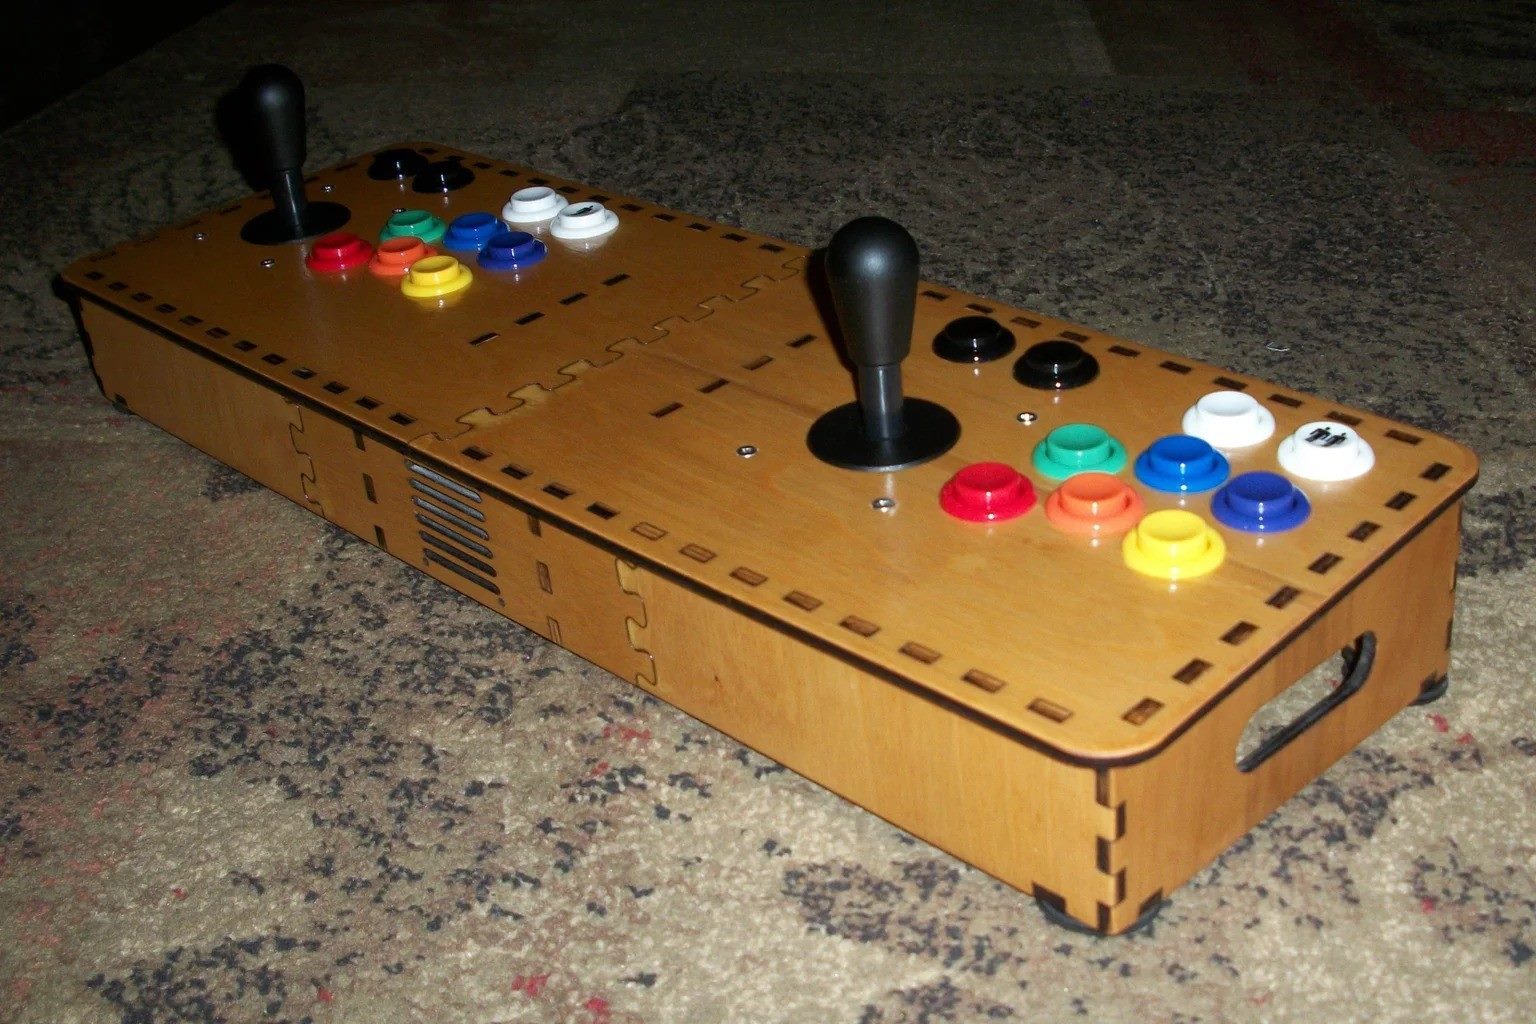 mame-configuration-with-joystick-a-gaming-enthusiasts-guide